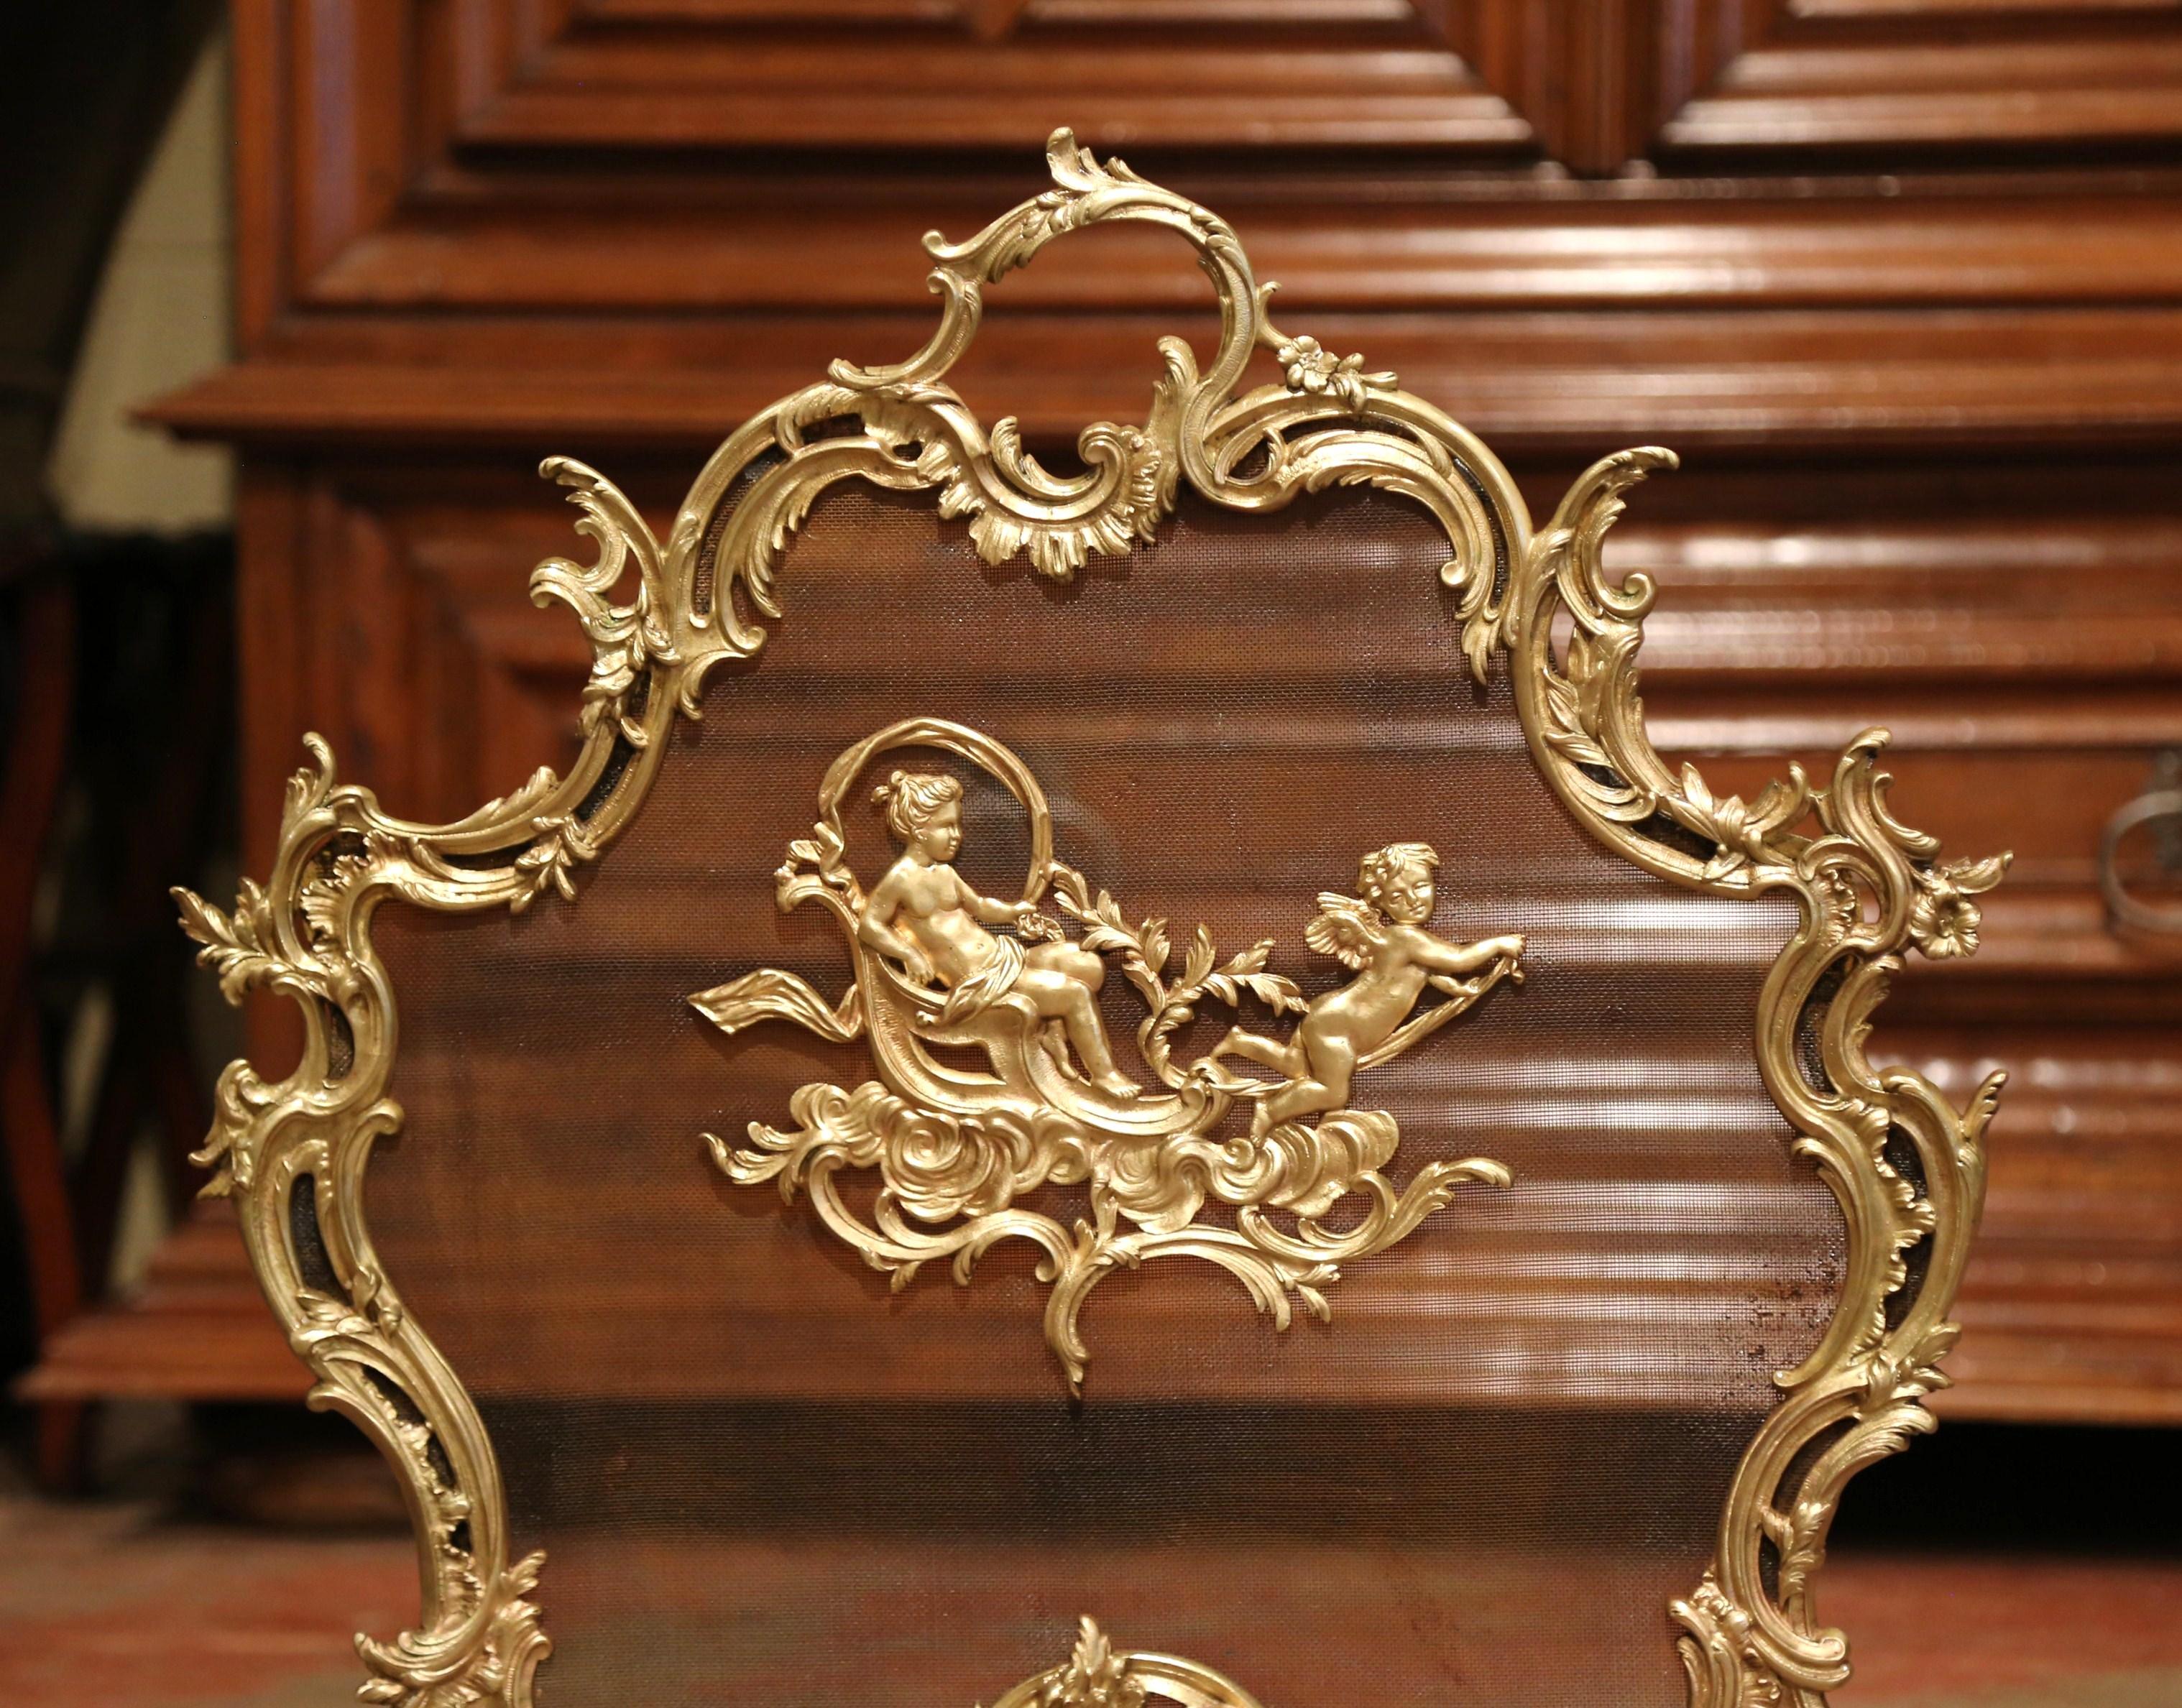 Hand-Crafted 19th Century French Louis XV Carved Bronze Doré Fireplace Screen with Cherubs